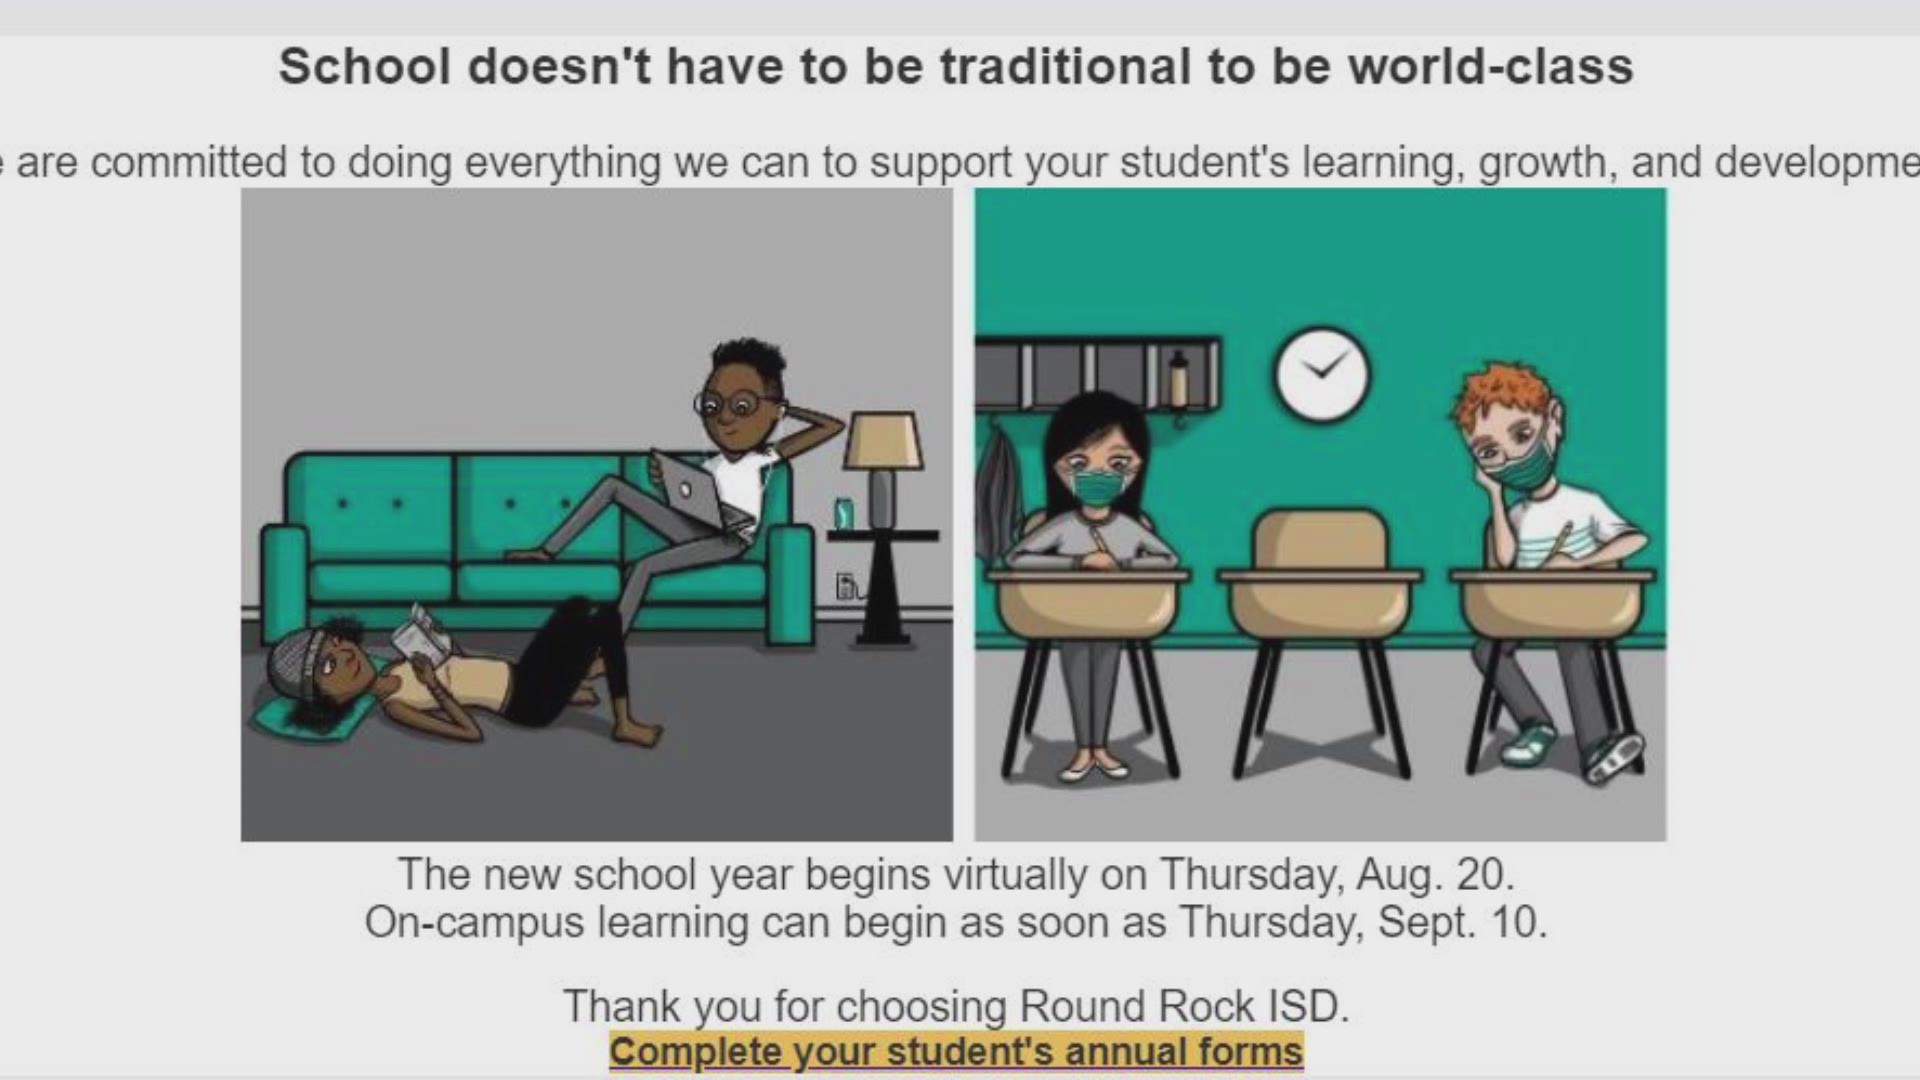 The Round Rock school district is apologizing after sending out an insensitive email.